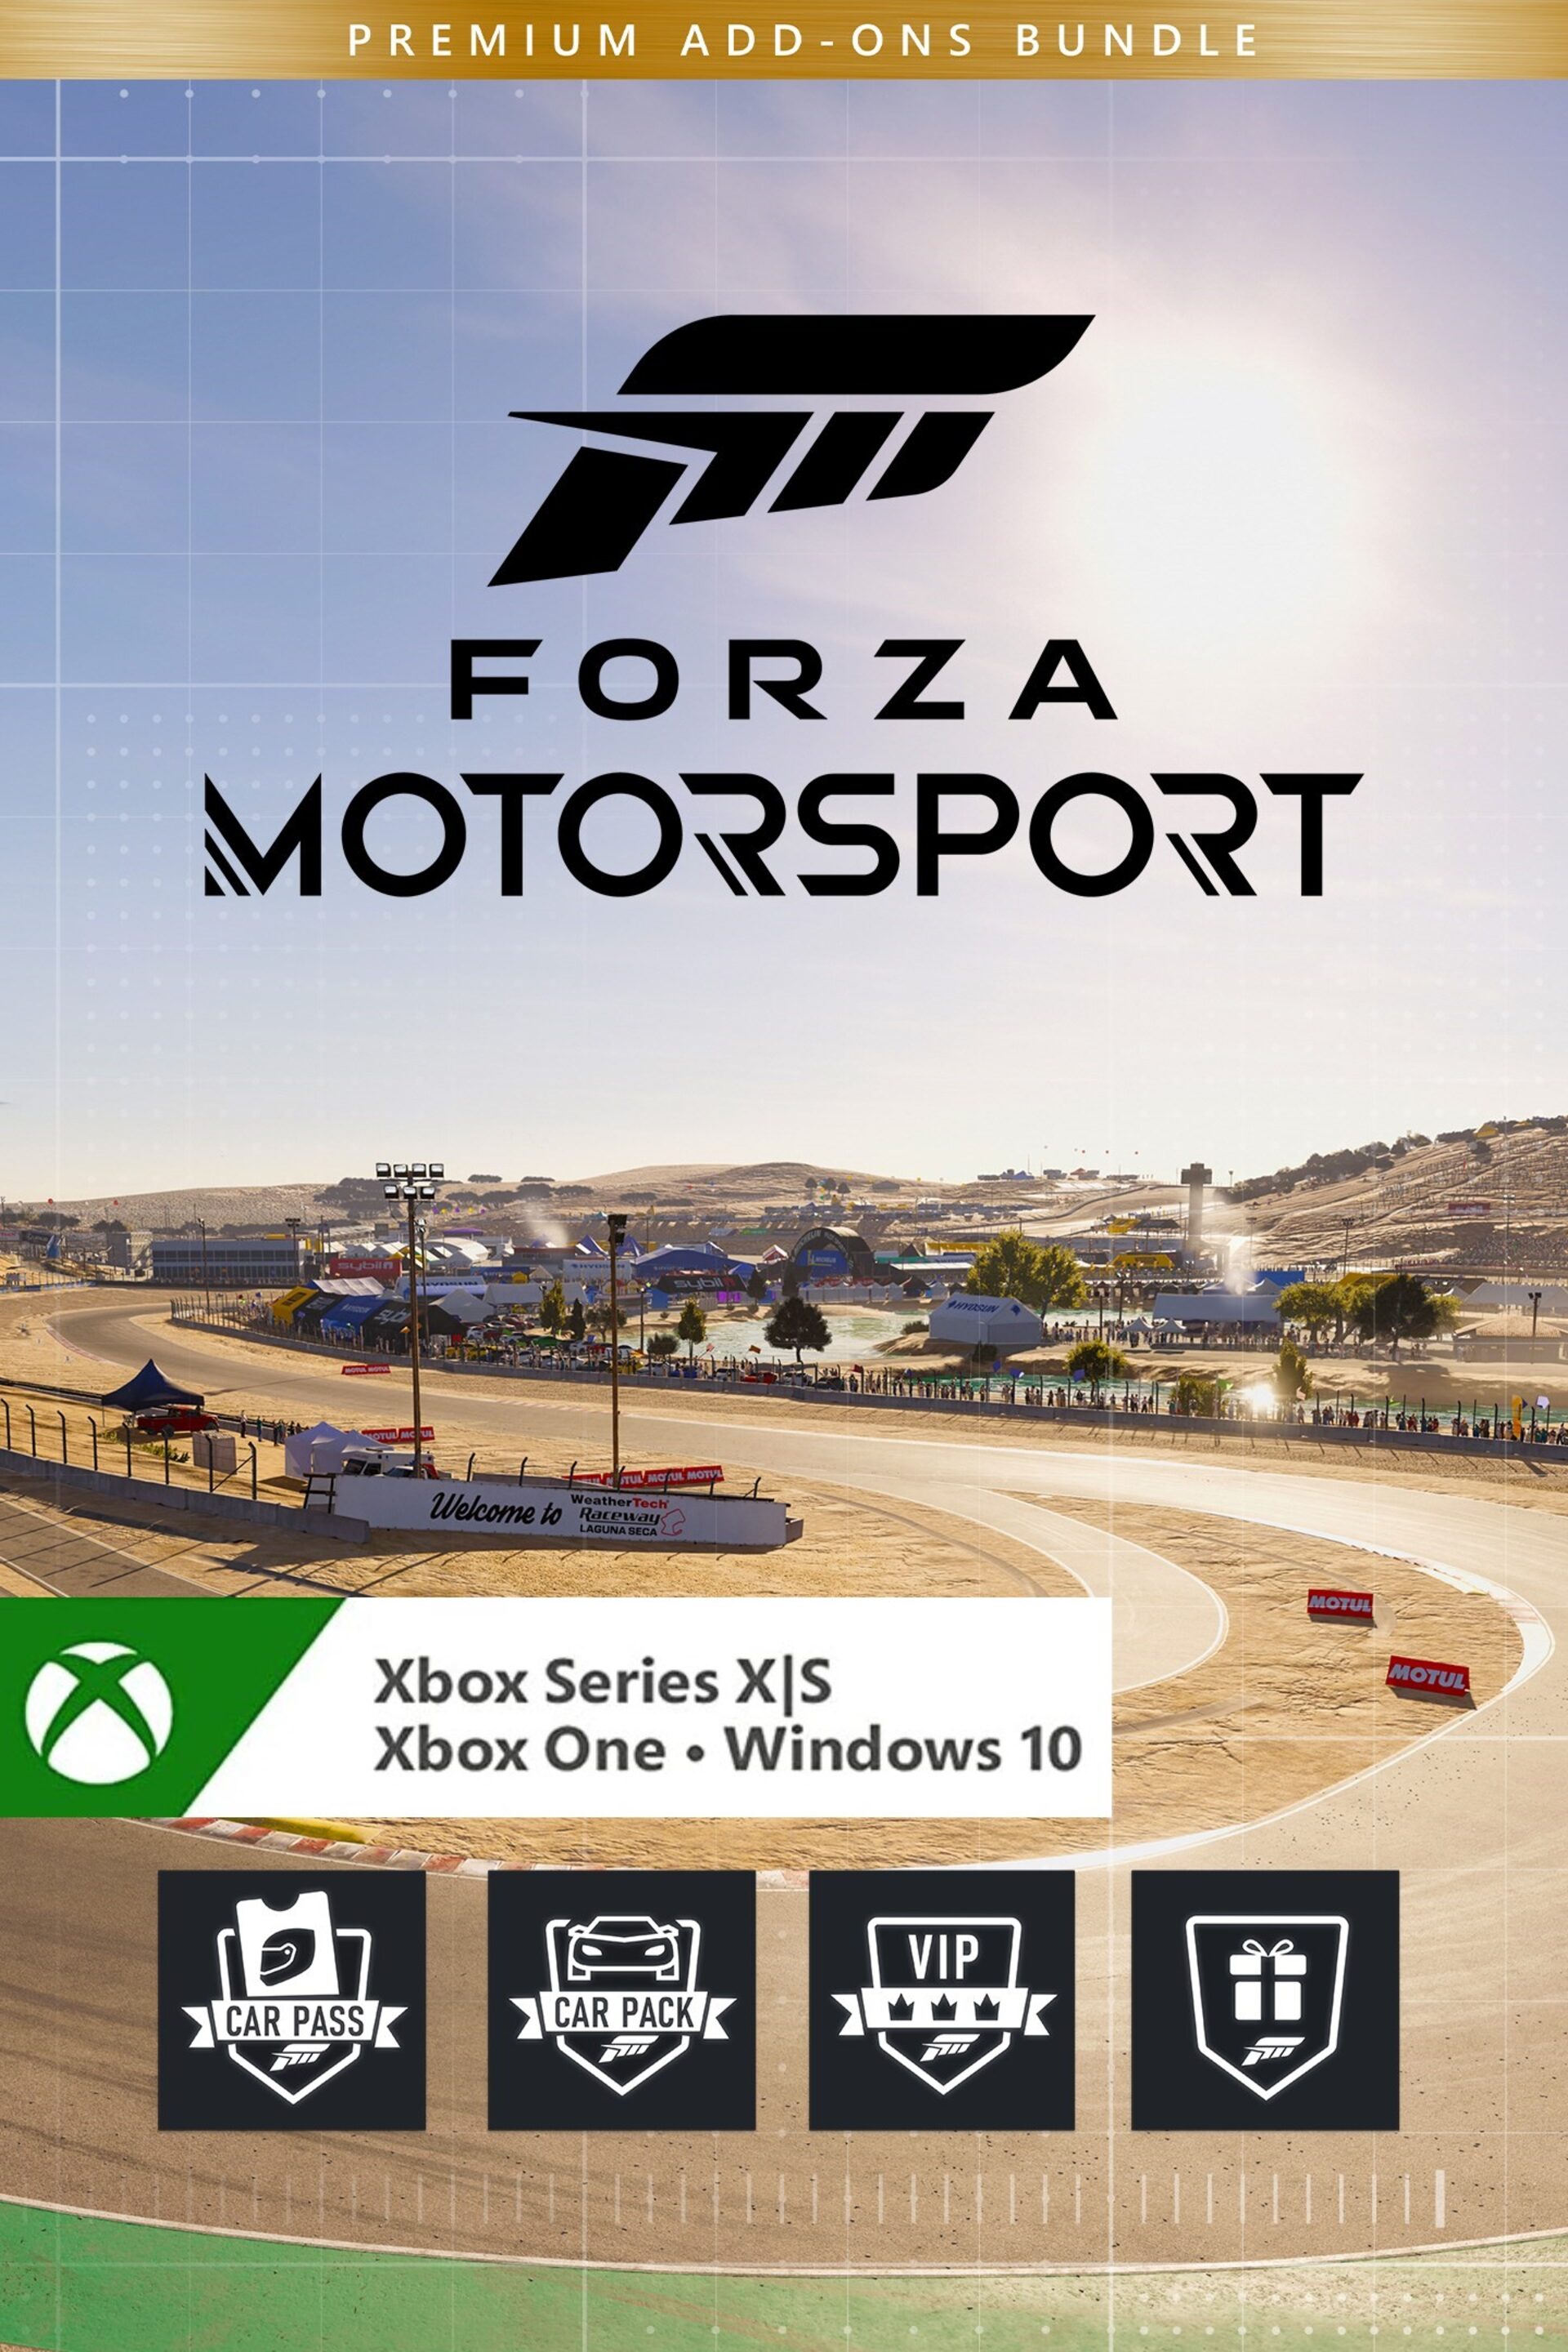 Forza Motorsport: Learning AI and Physics Overhaul